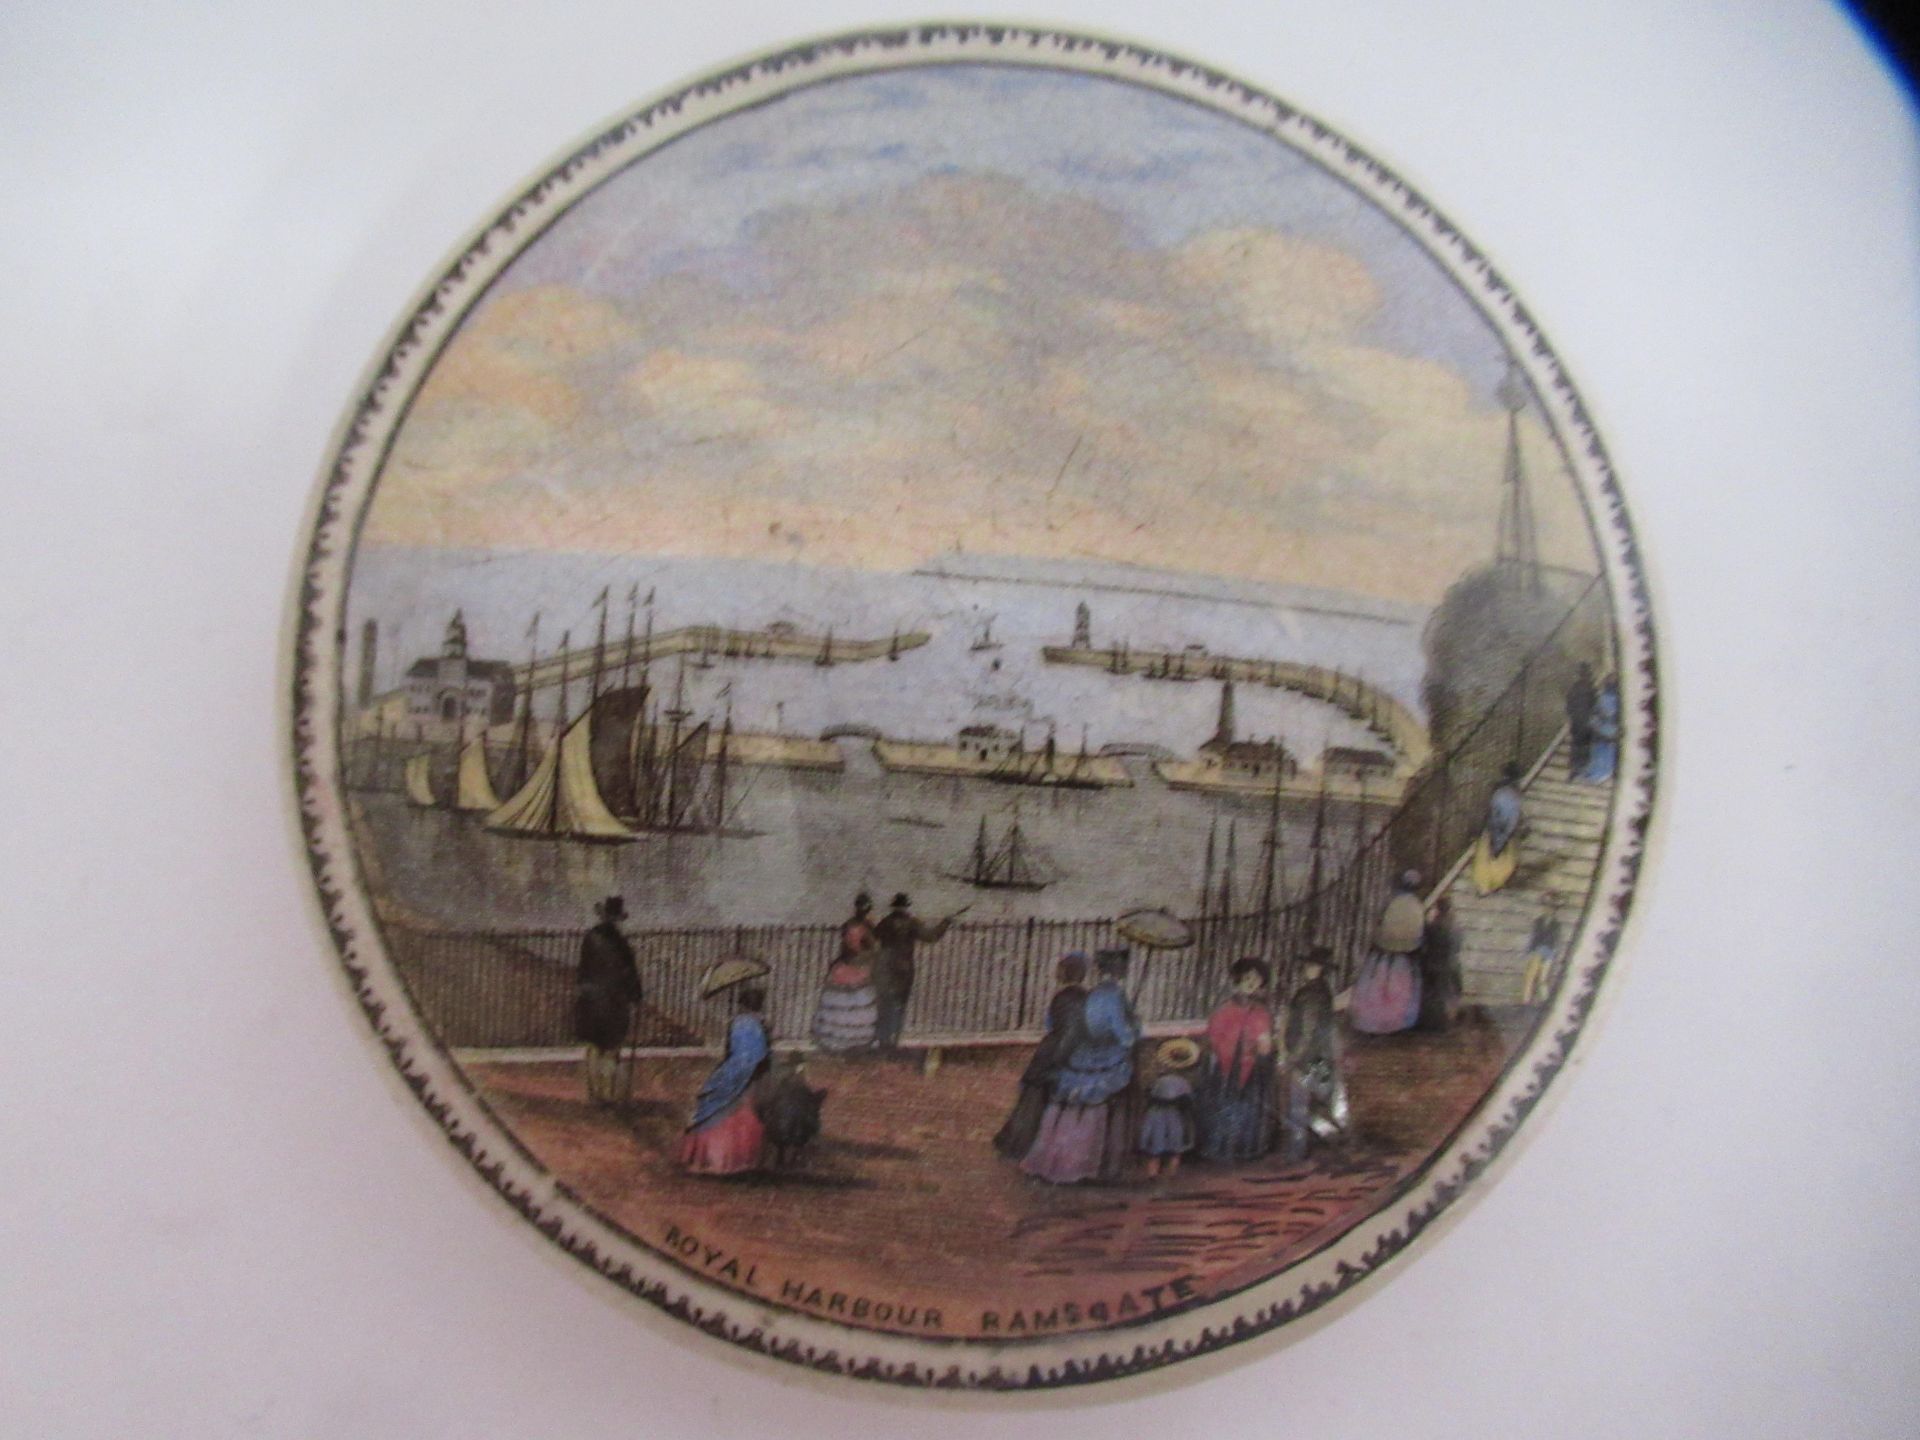 6x Prattware ceramic lids including 'Royal Harbour Ramsgate', 'The Chin-Chew River', 'Contrast', and - Image 2 of 21